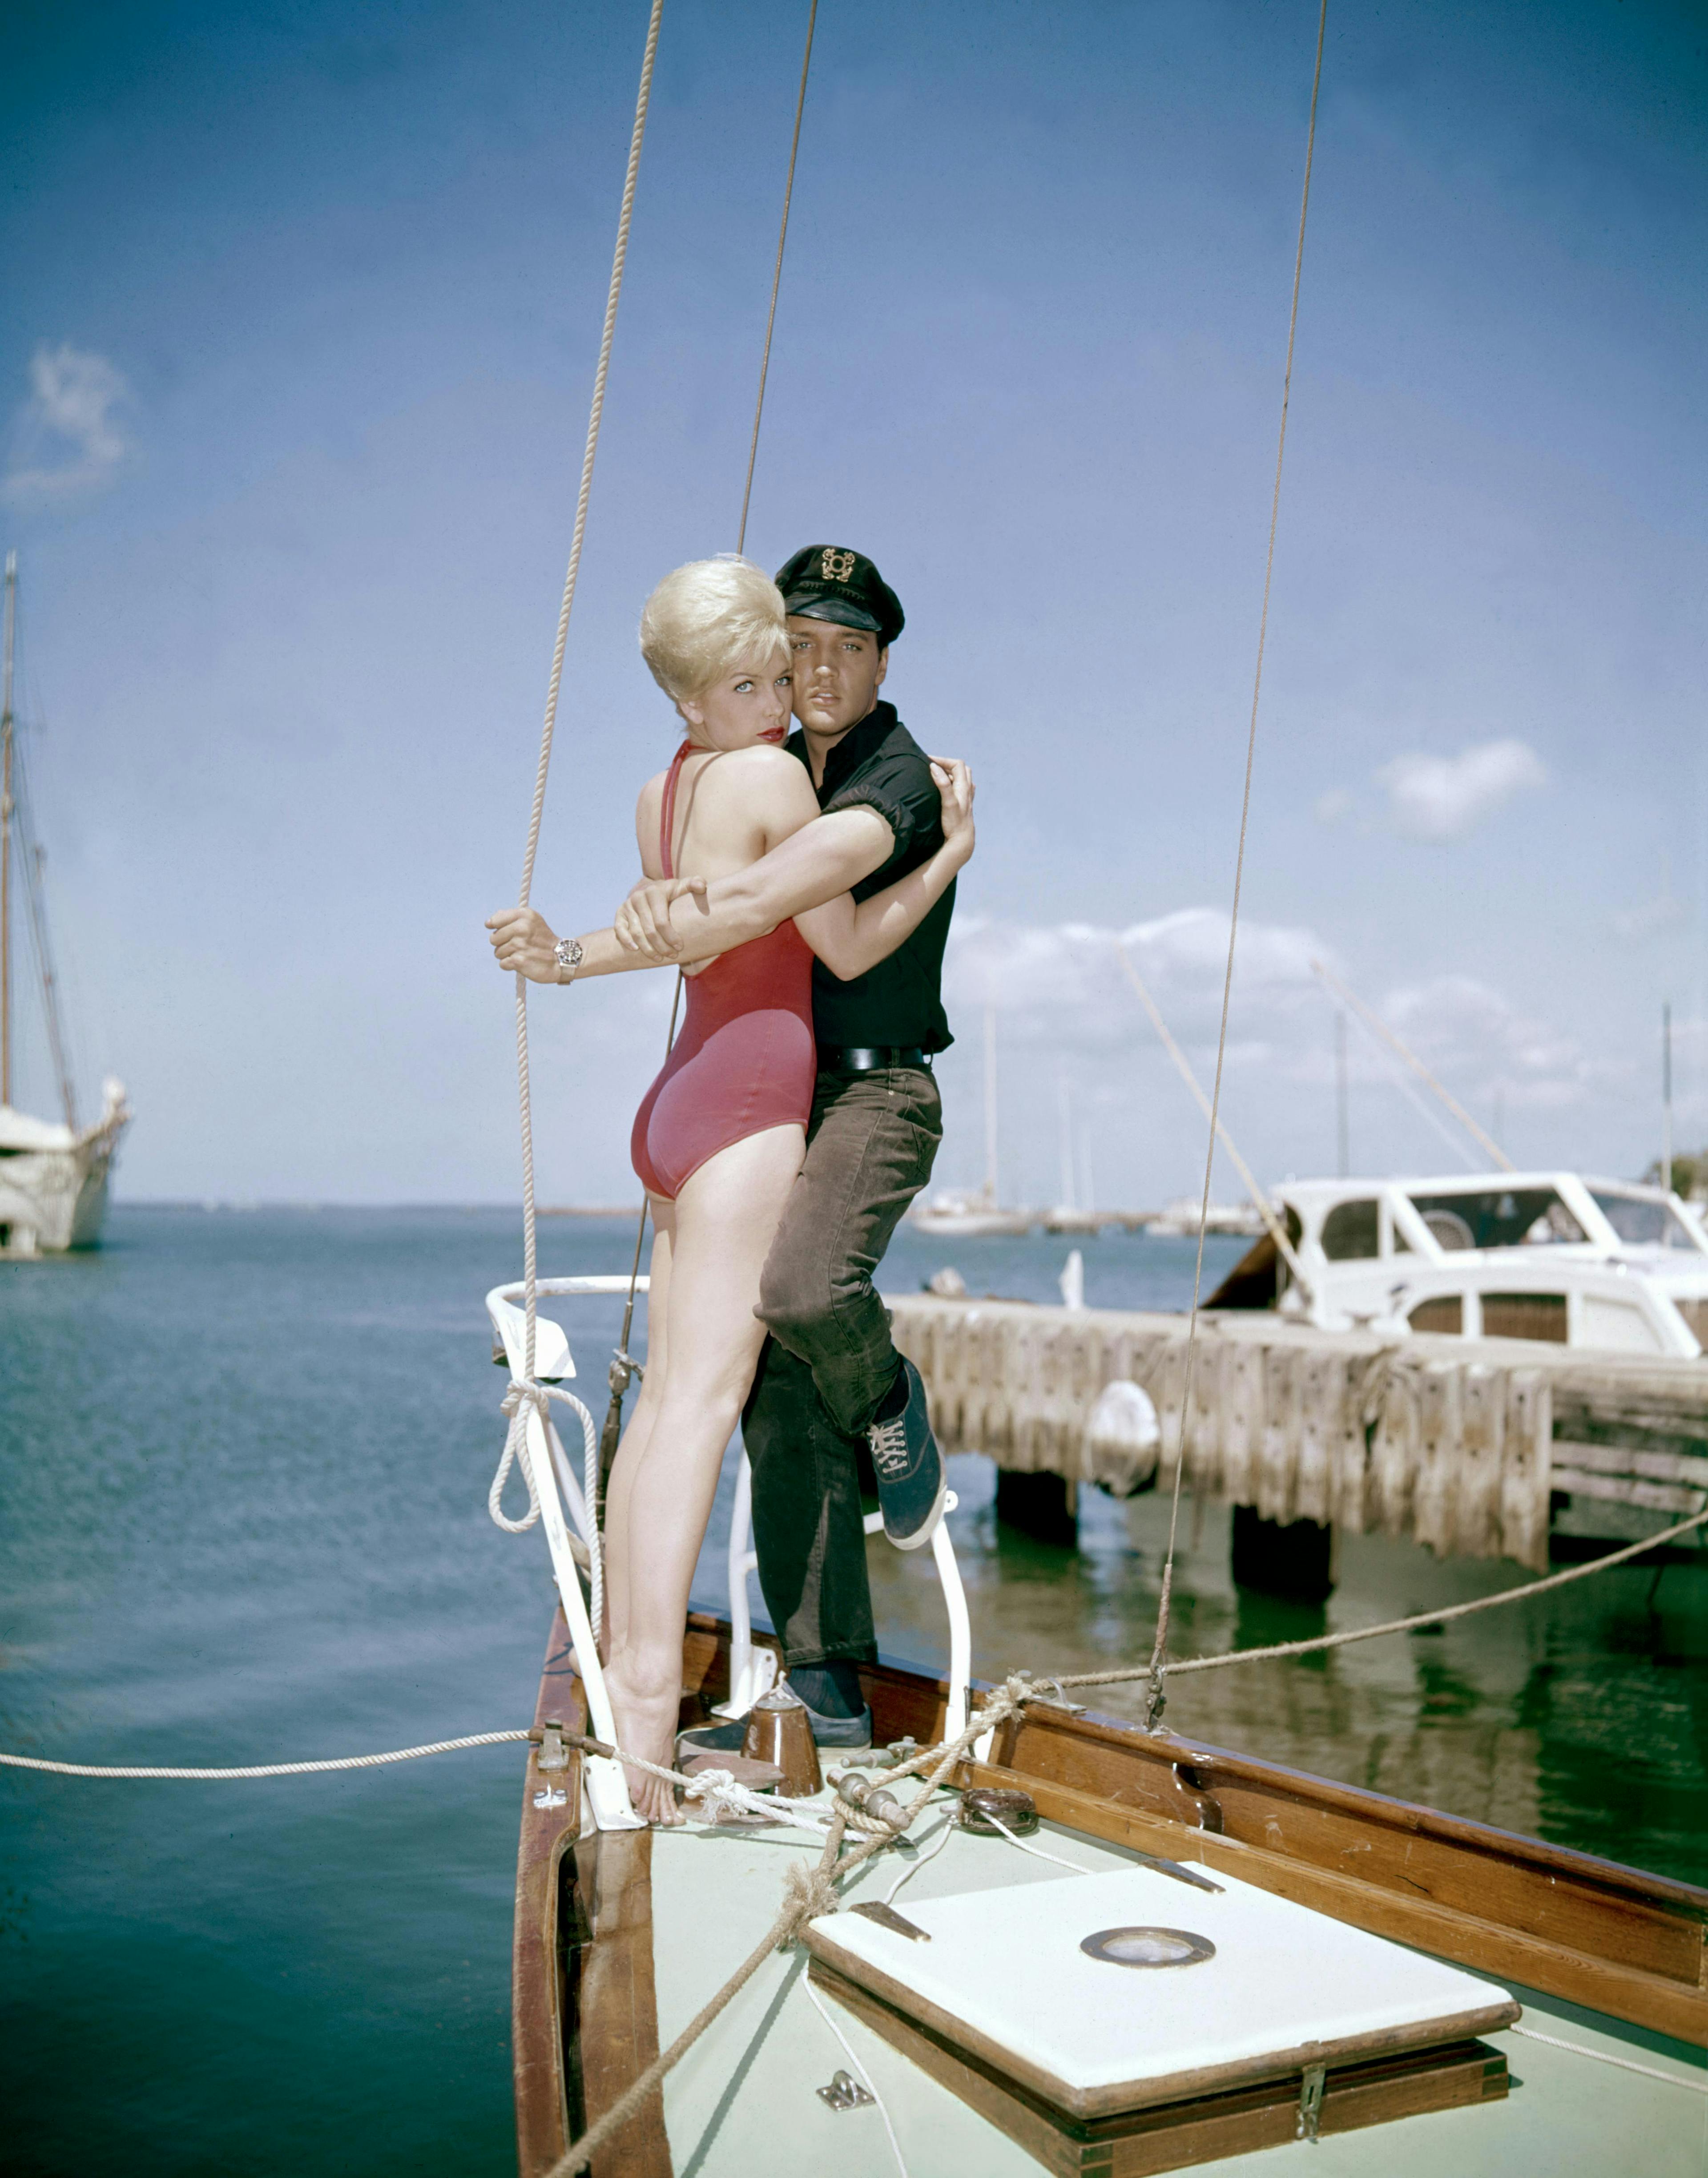 1960s two people young adult man young adult woman caucasian ethnicity movie set sailboat actress actor performing arts singer music celebrities hugging american movie film still hawaii elvis presley stella stevens waterfront boat yacht port watercraft back person shorts pier